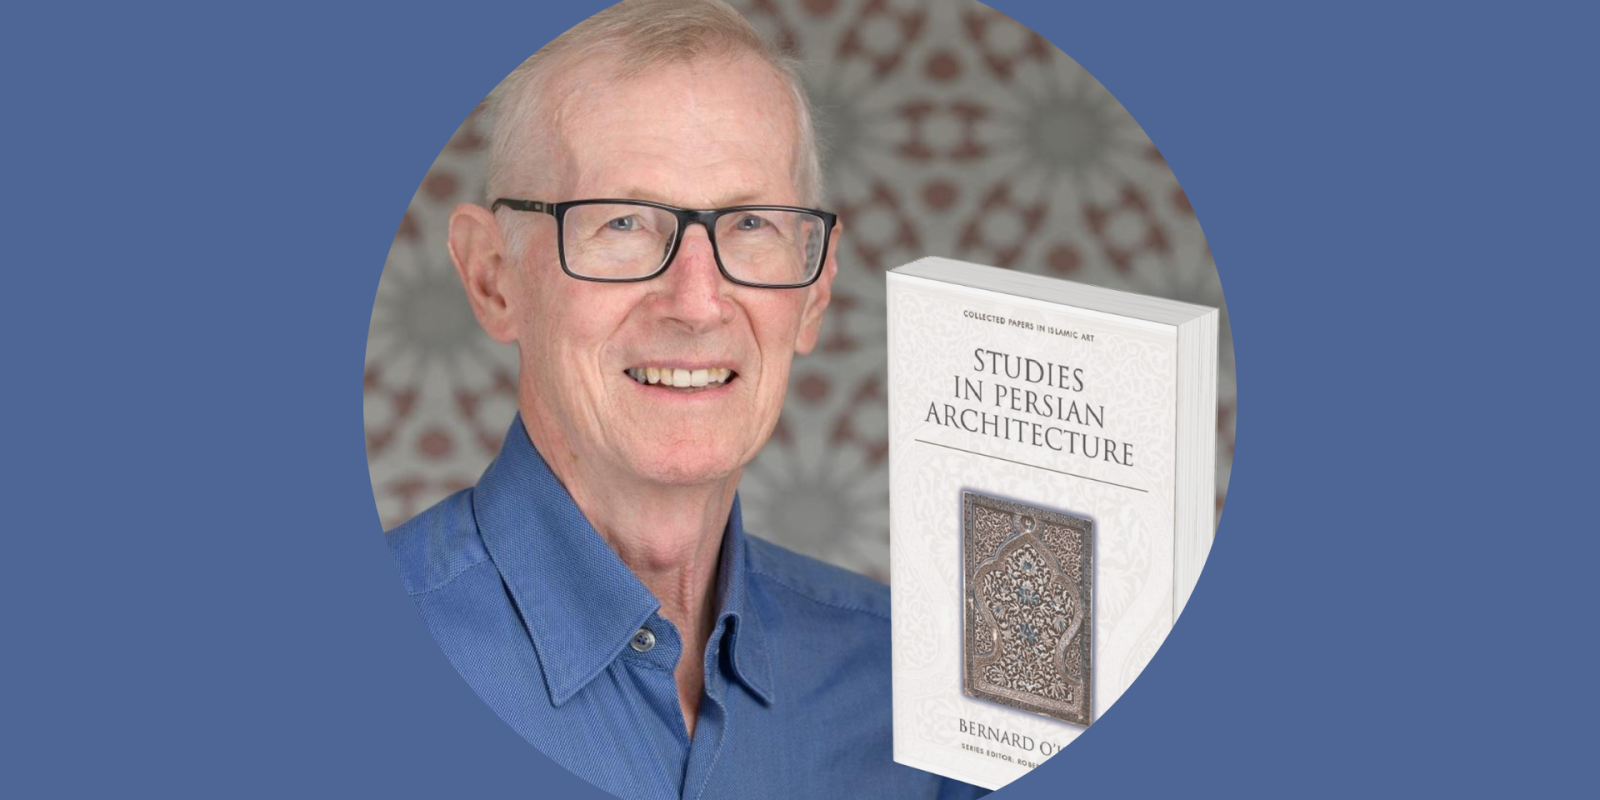 Man in a blue shirt and glasses with a book cover that reads "Studies in Persian Architecture"